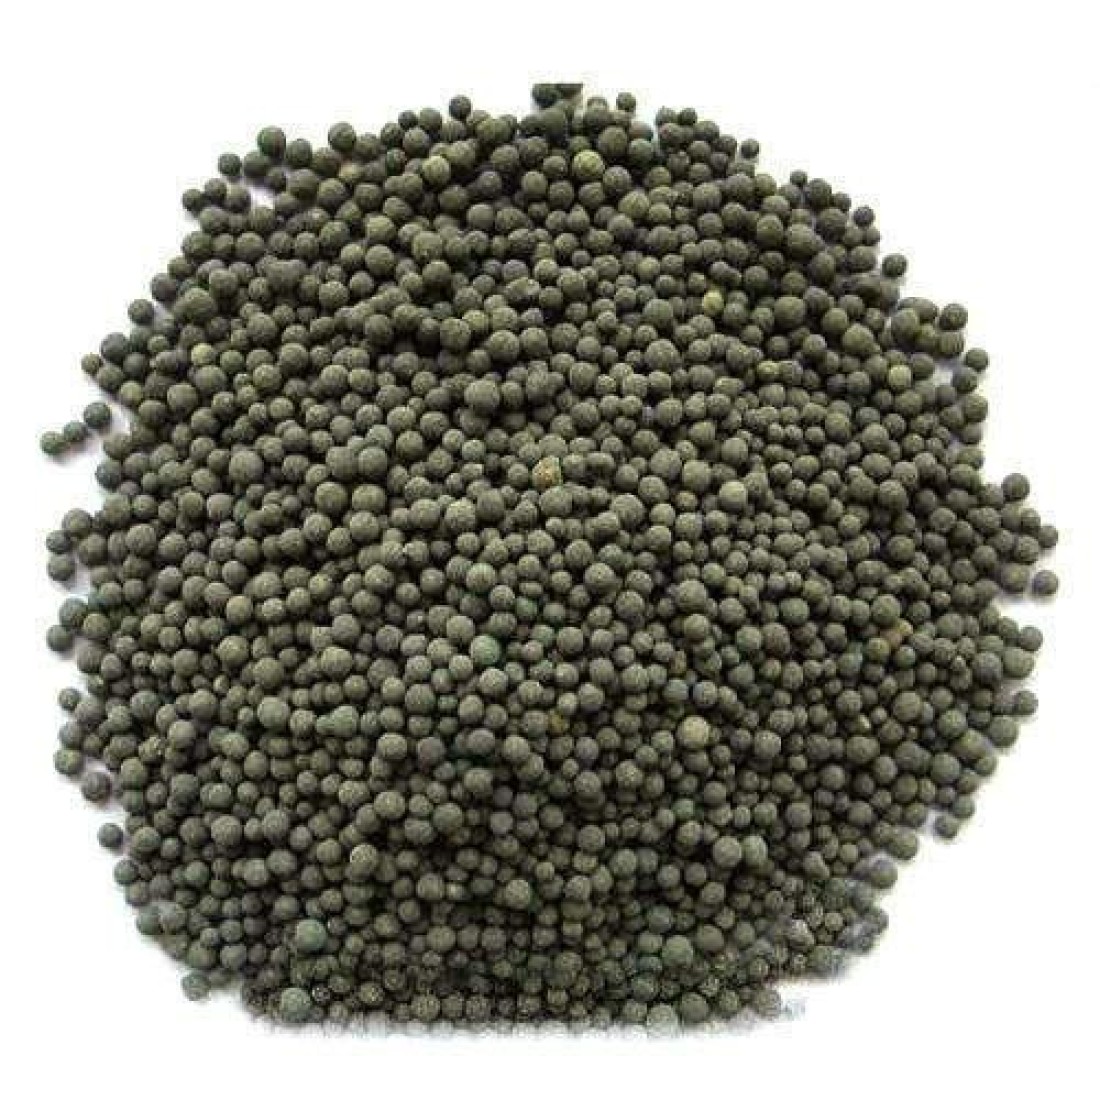 Seaweed Extract granules Organic Plant Fertilizer for Flowers, Fruits and Vegetables, Photosynthesis Enhancer.(Pack of 2 kgs)